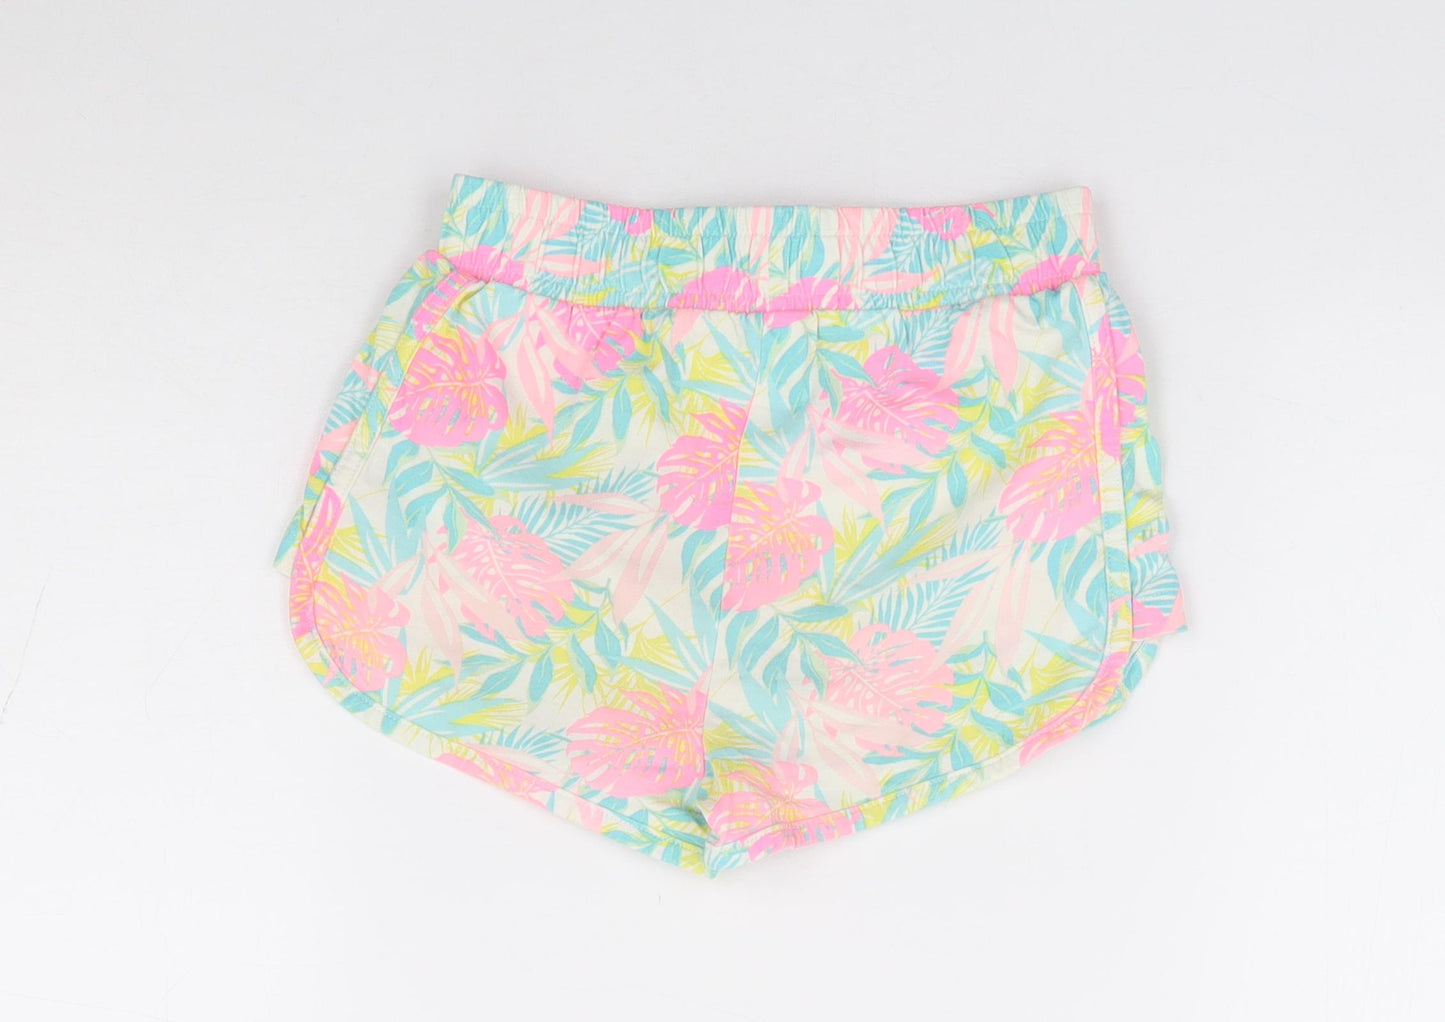 Dunnes Stores Girls Multicoloured Geometric 100% Cotton Hot Pants Shorts Size 5-6 Years Regular Tie - Leaf Print